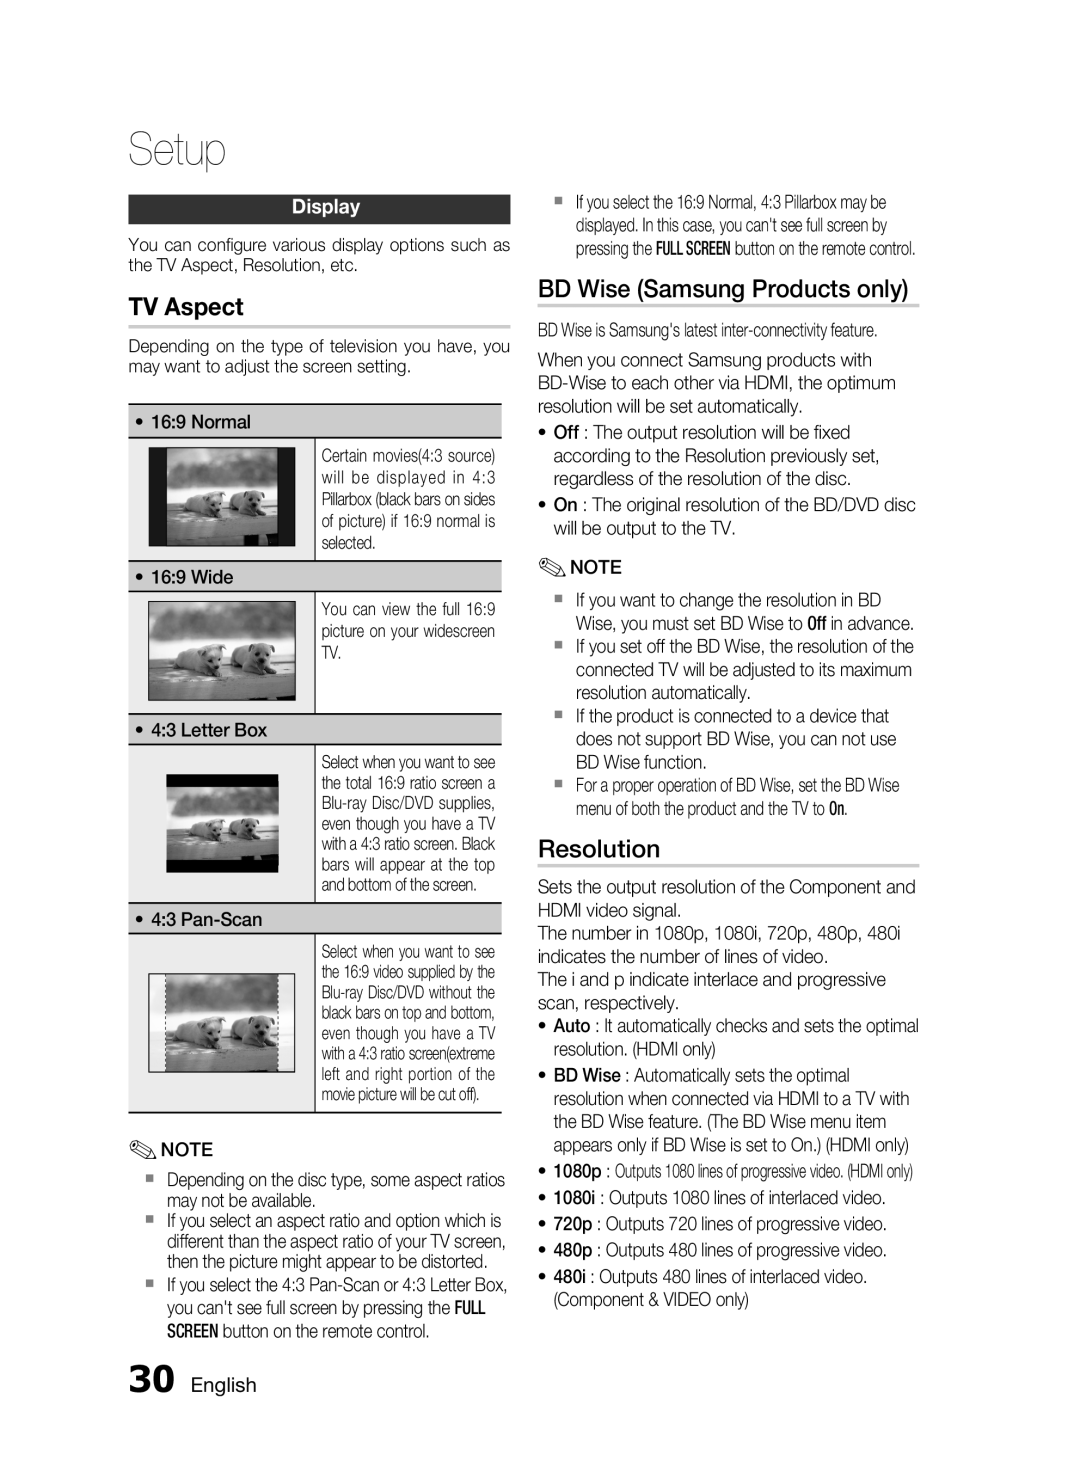 Samsung AH68-02255S, HT-C6530 user manual TV Aspect, BD Wise Samsung Products only, Resolution, Display, English, Setup 